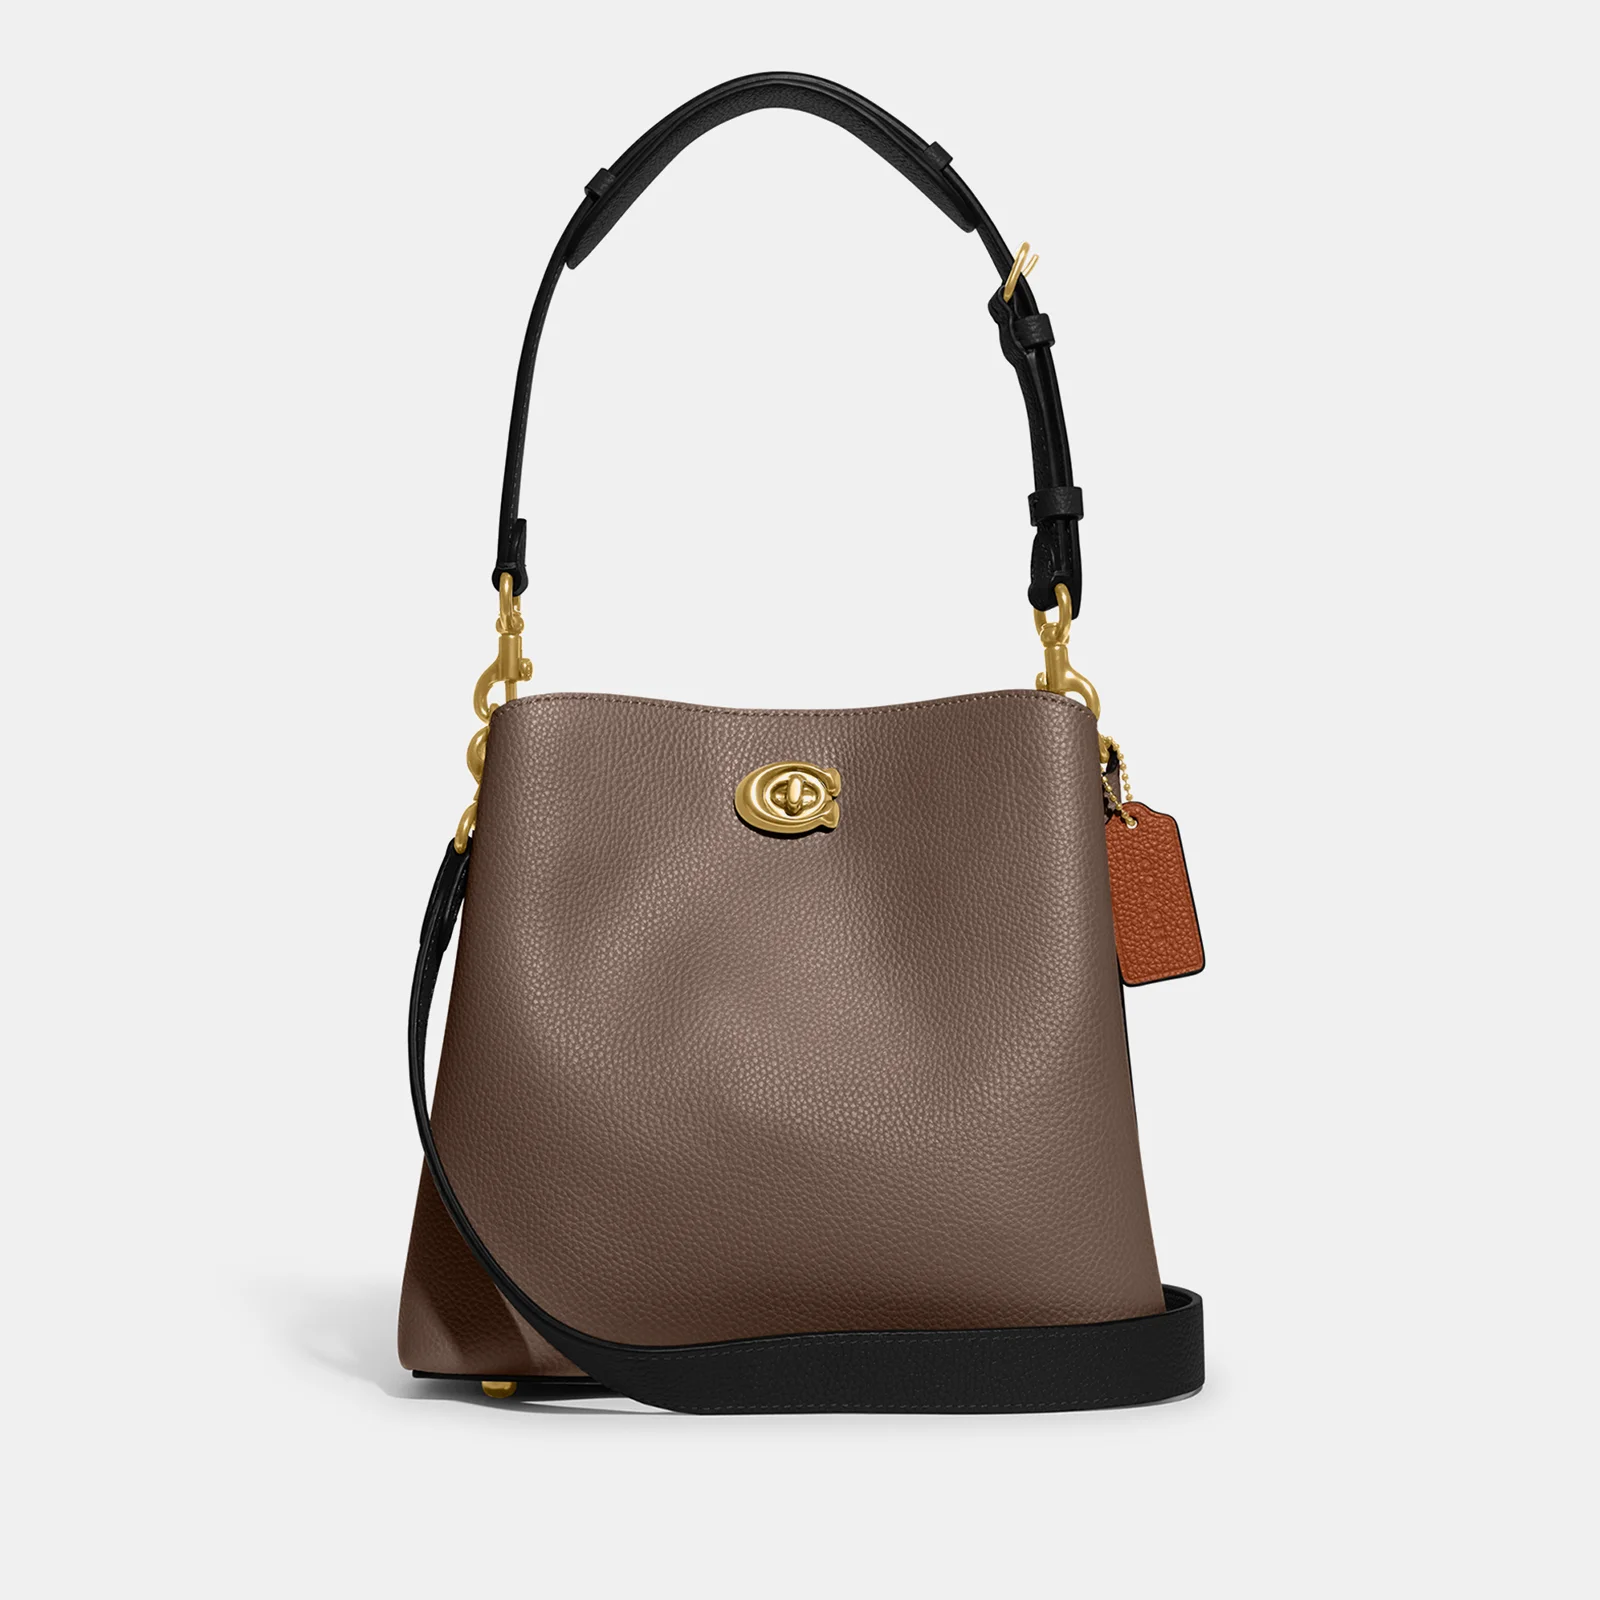 Coach Willow Pebbled Leather Bucket Bag Image 1